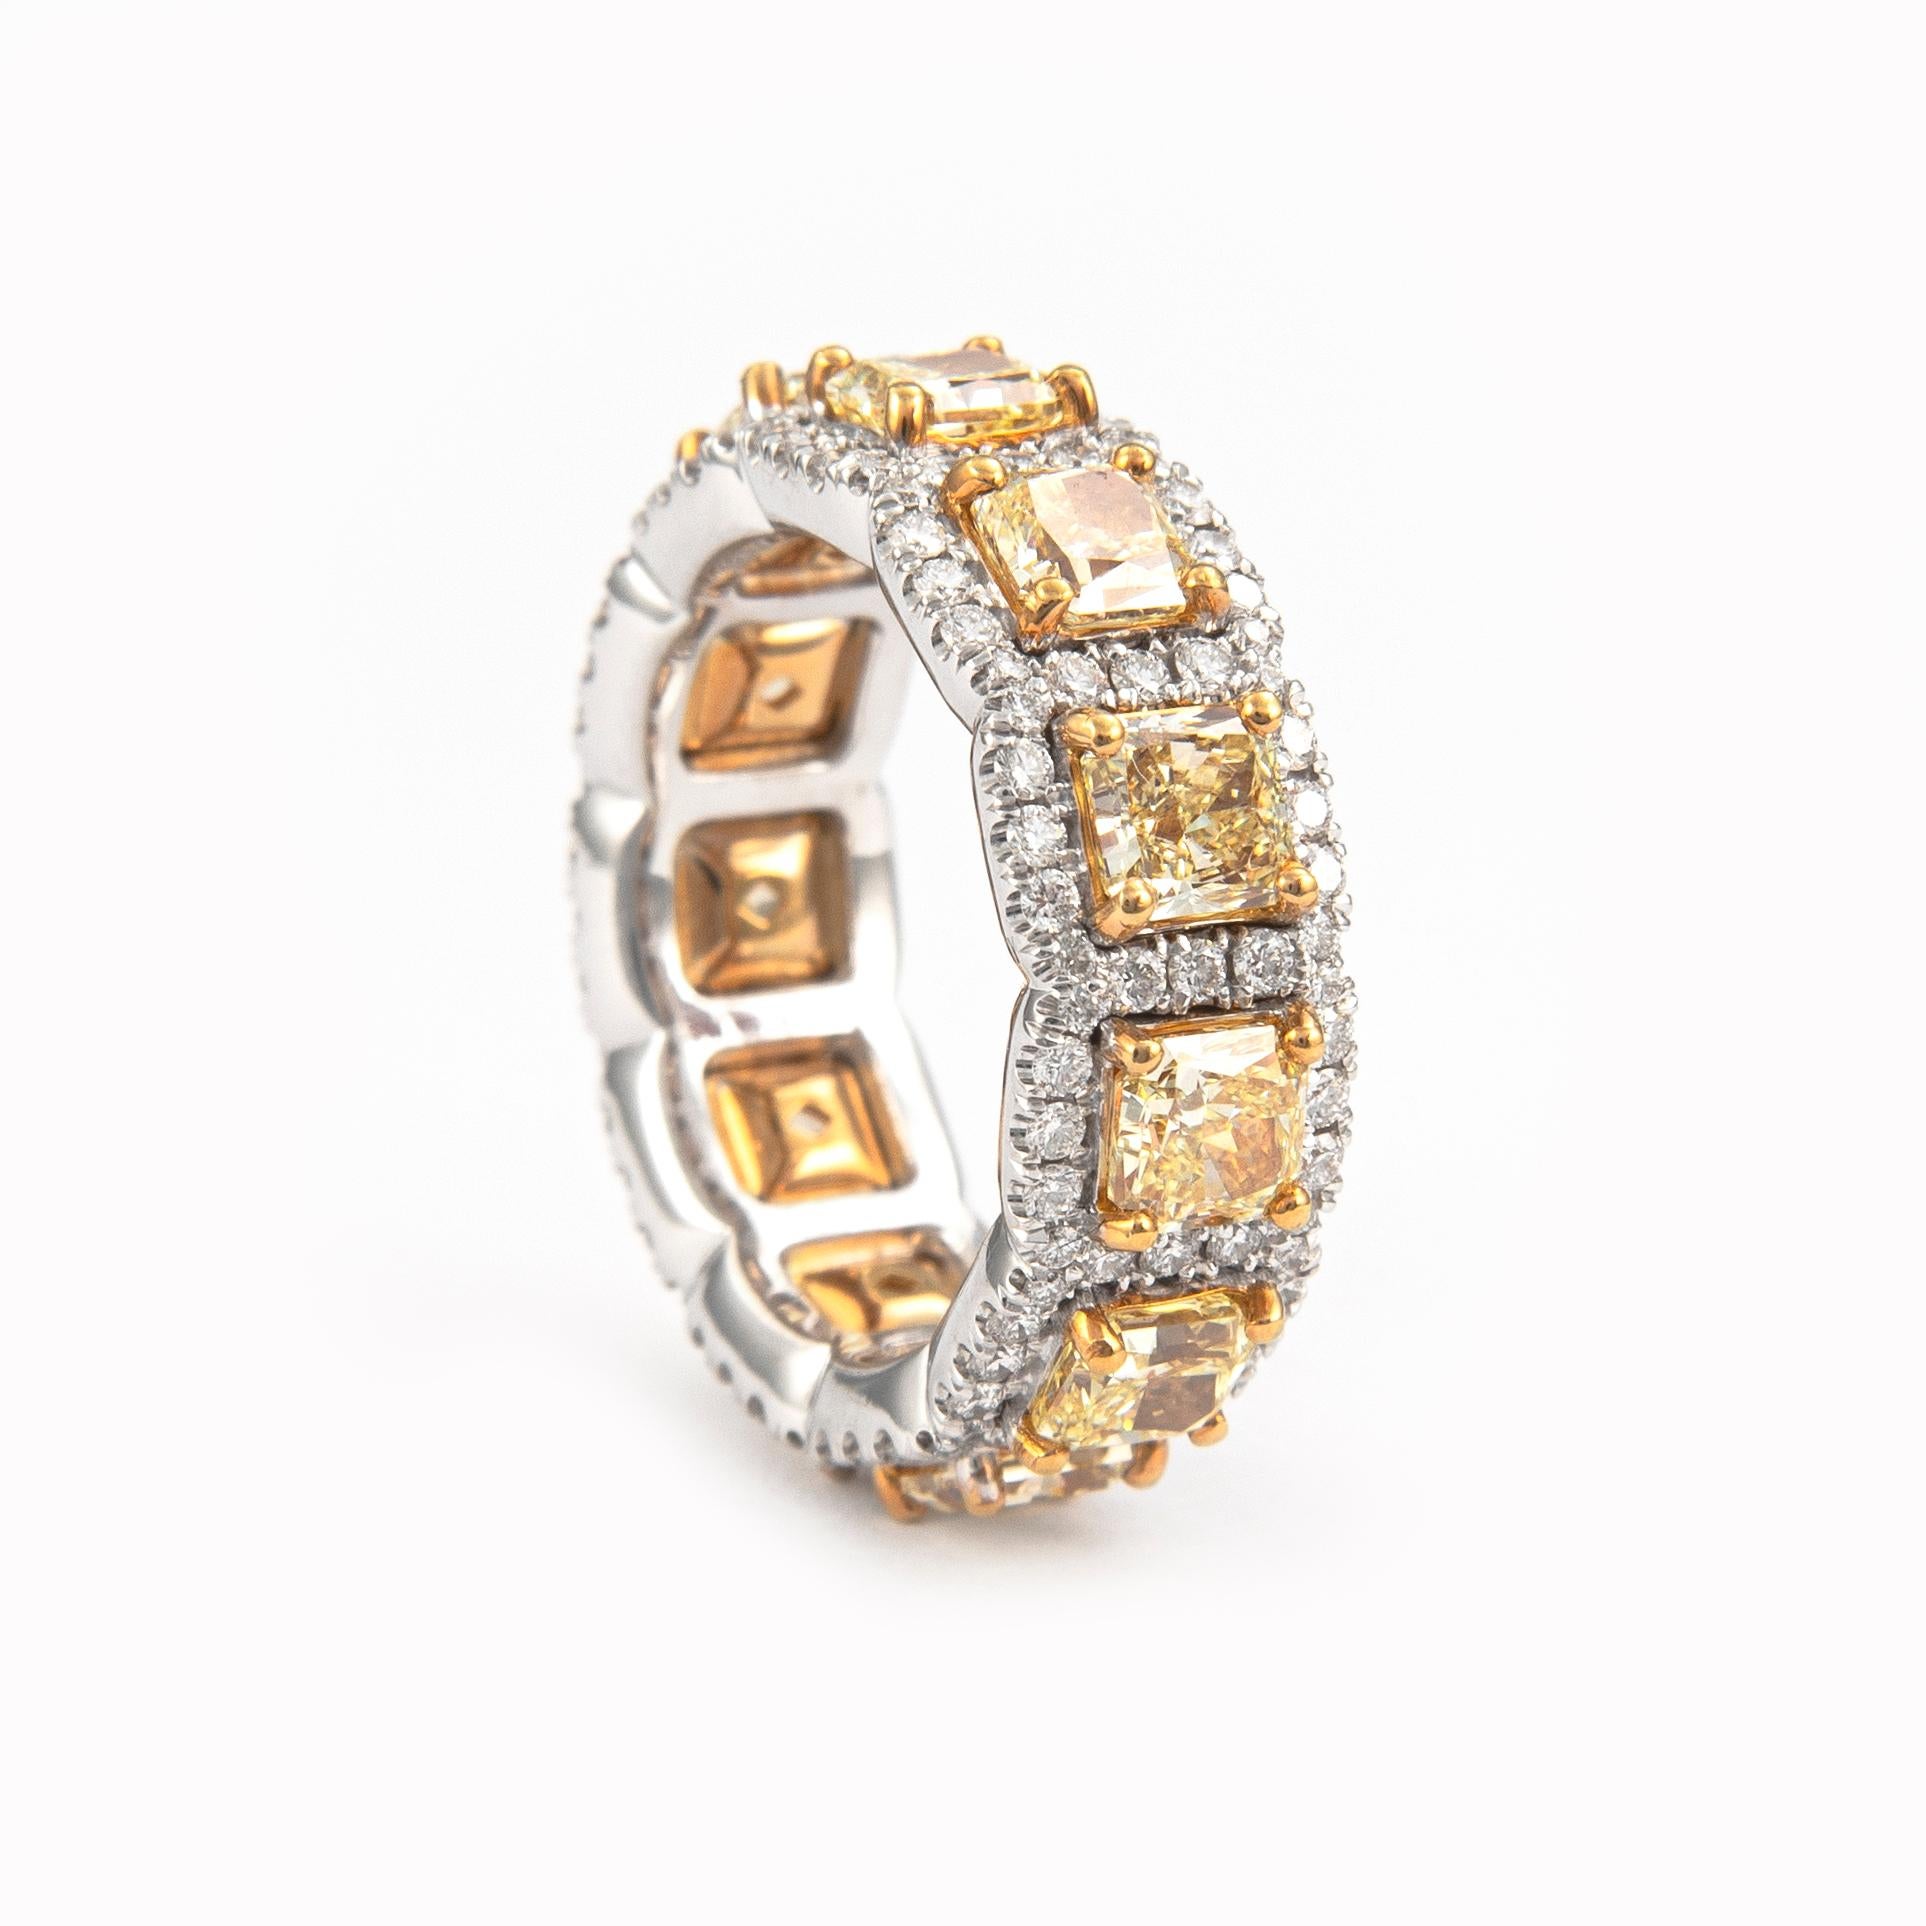 Timeless and unique diamond eternity band with halo. High jewelry Alexander Beverly Hills
14 radiant yellow diamonds, 5.35 carats total (apx .48ct each), VS clarity. Complimented by 1.06ct of round brilliant diamonds, approximately G/H color and VS